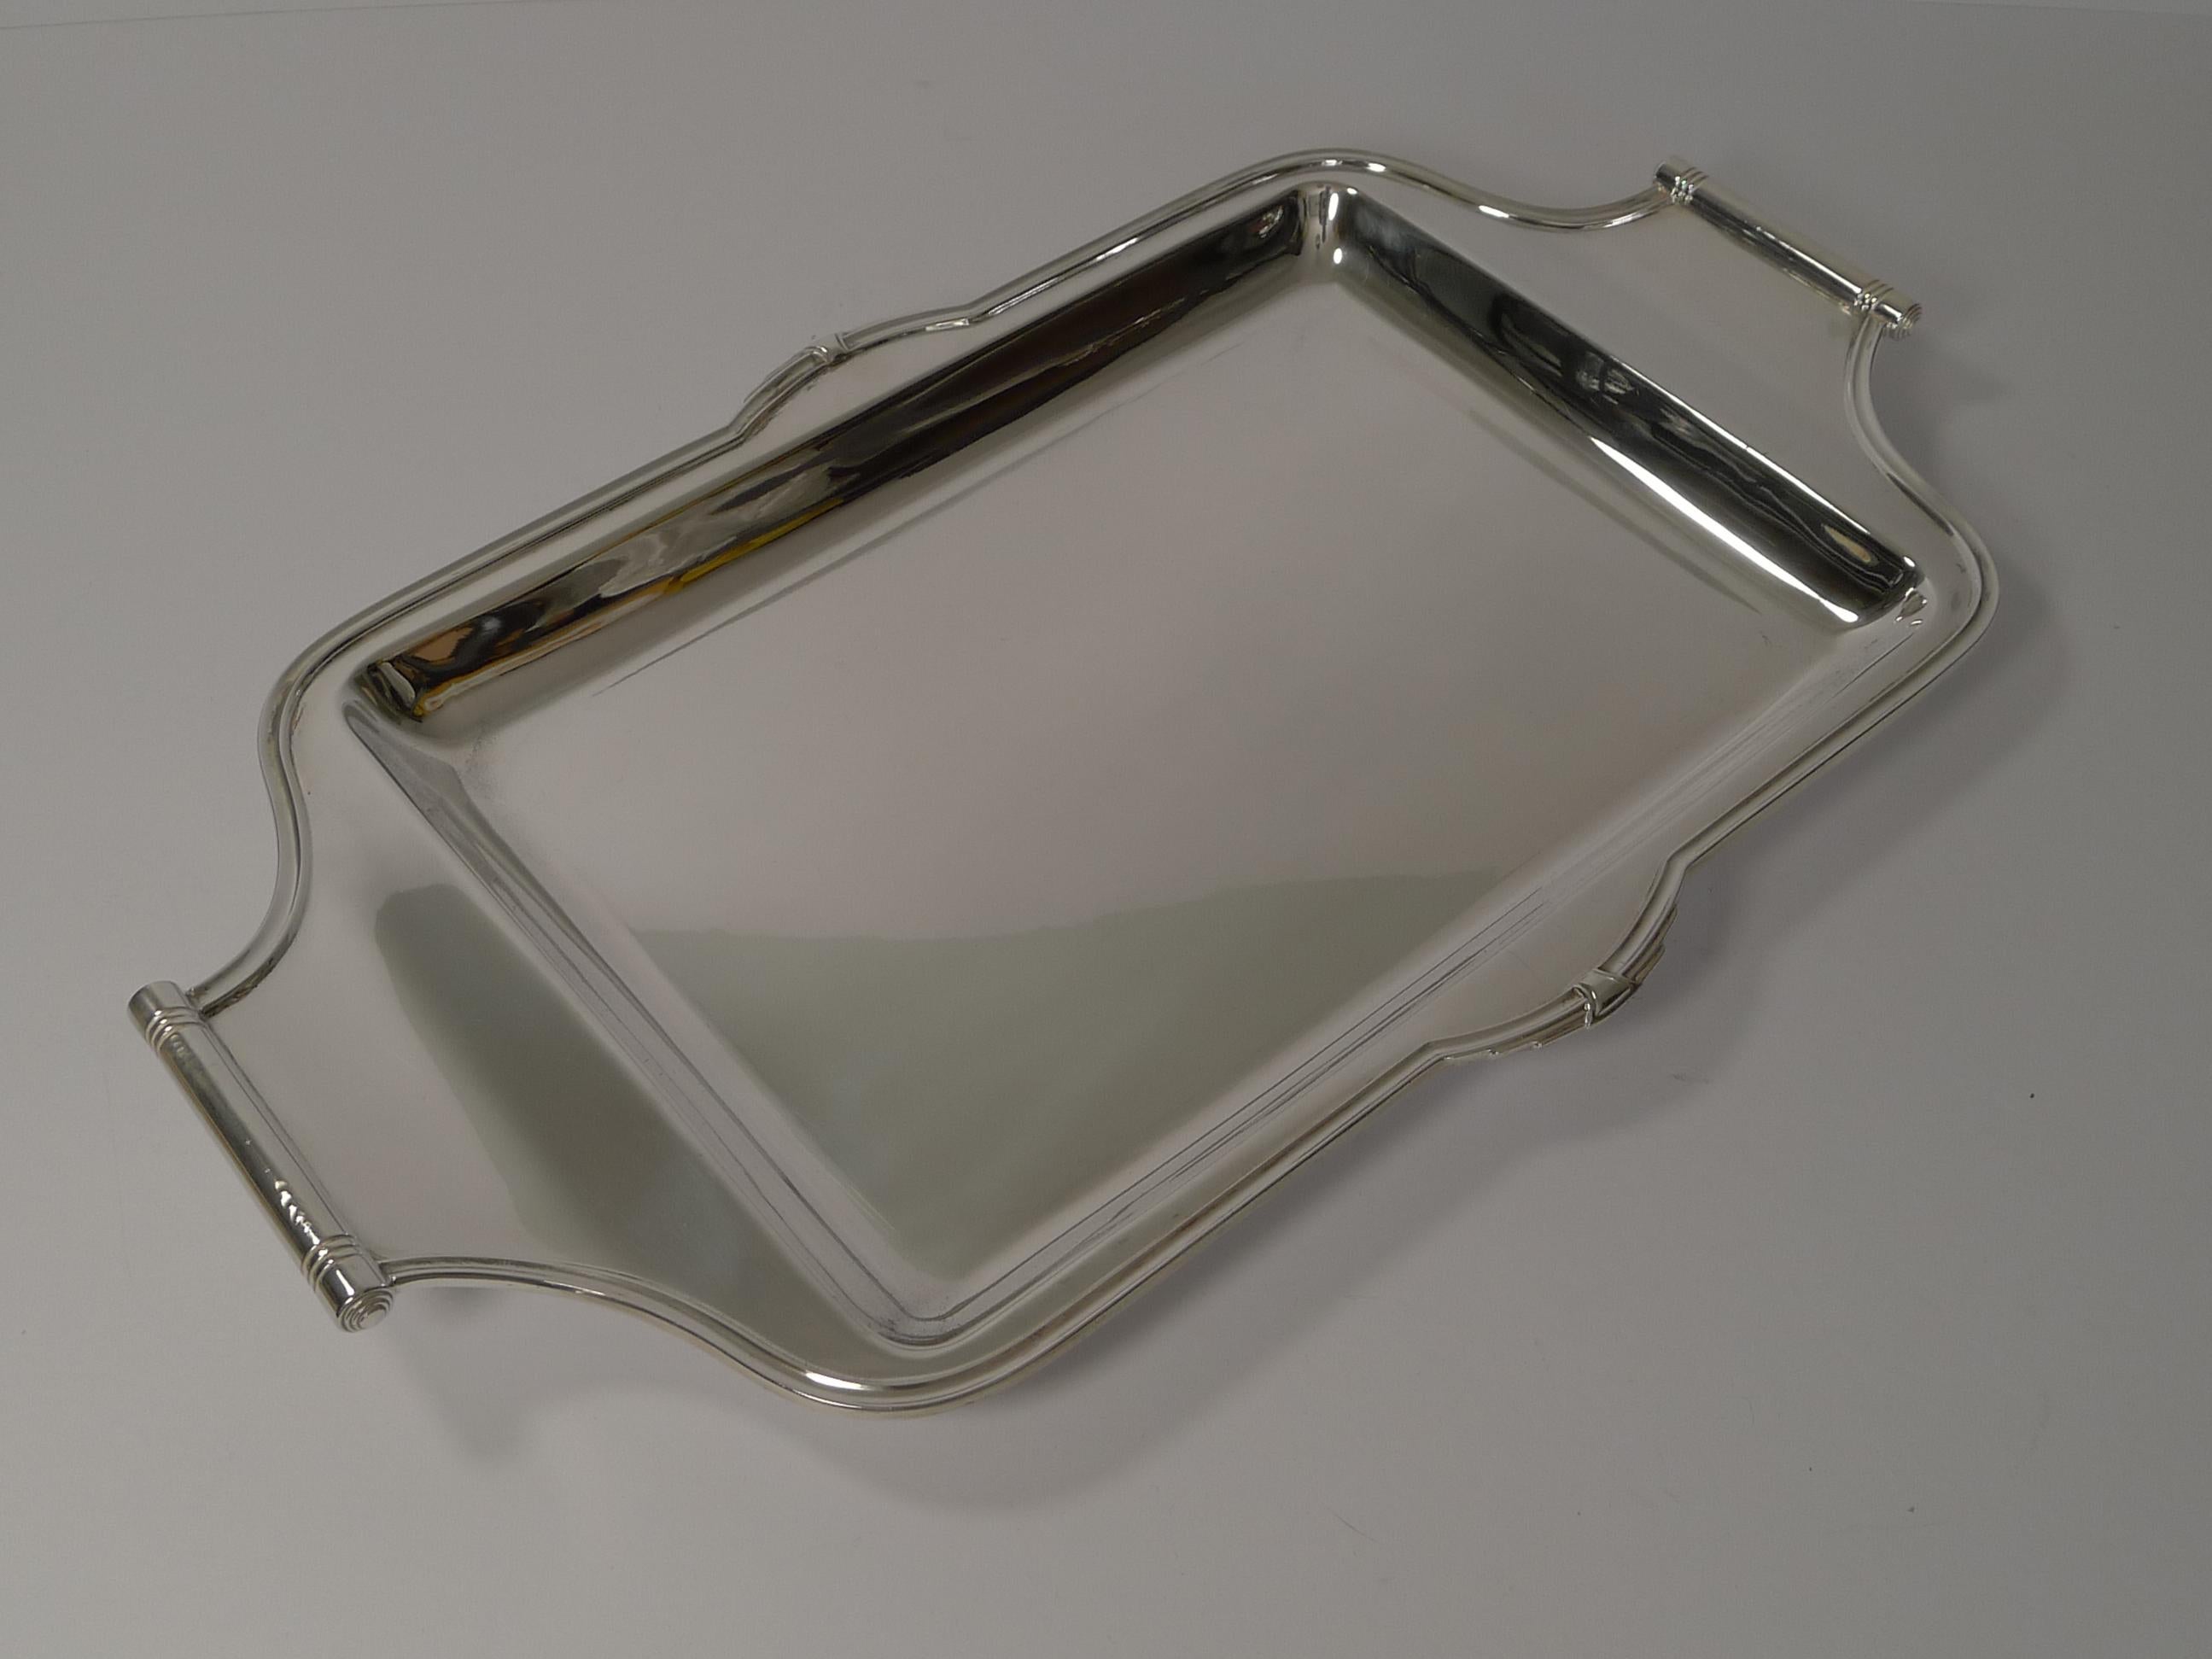 About as stylish as they get, this is stunning shaped cocktail tray with beautiful Art Deco detailing including beautiful handles.

Just back from our silversmith's workshop where any dents were removed and restored to it's former glory.

The